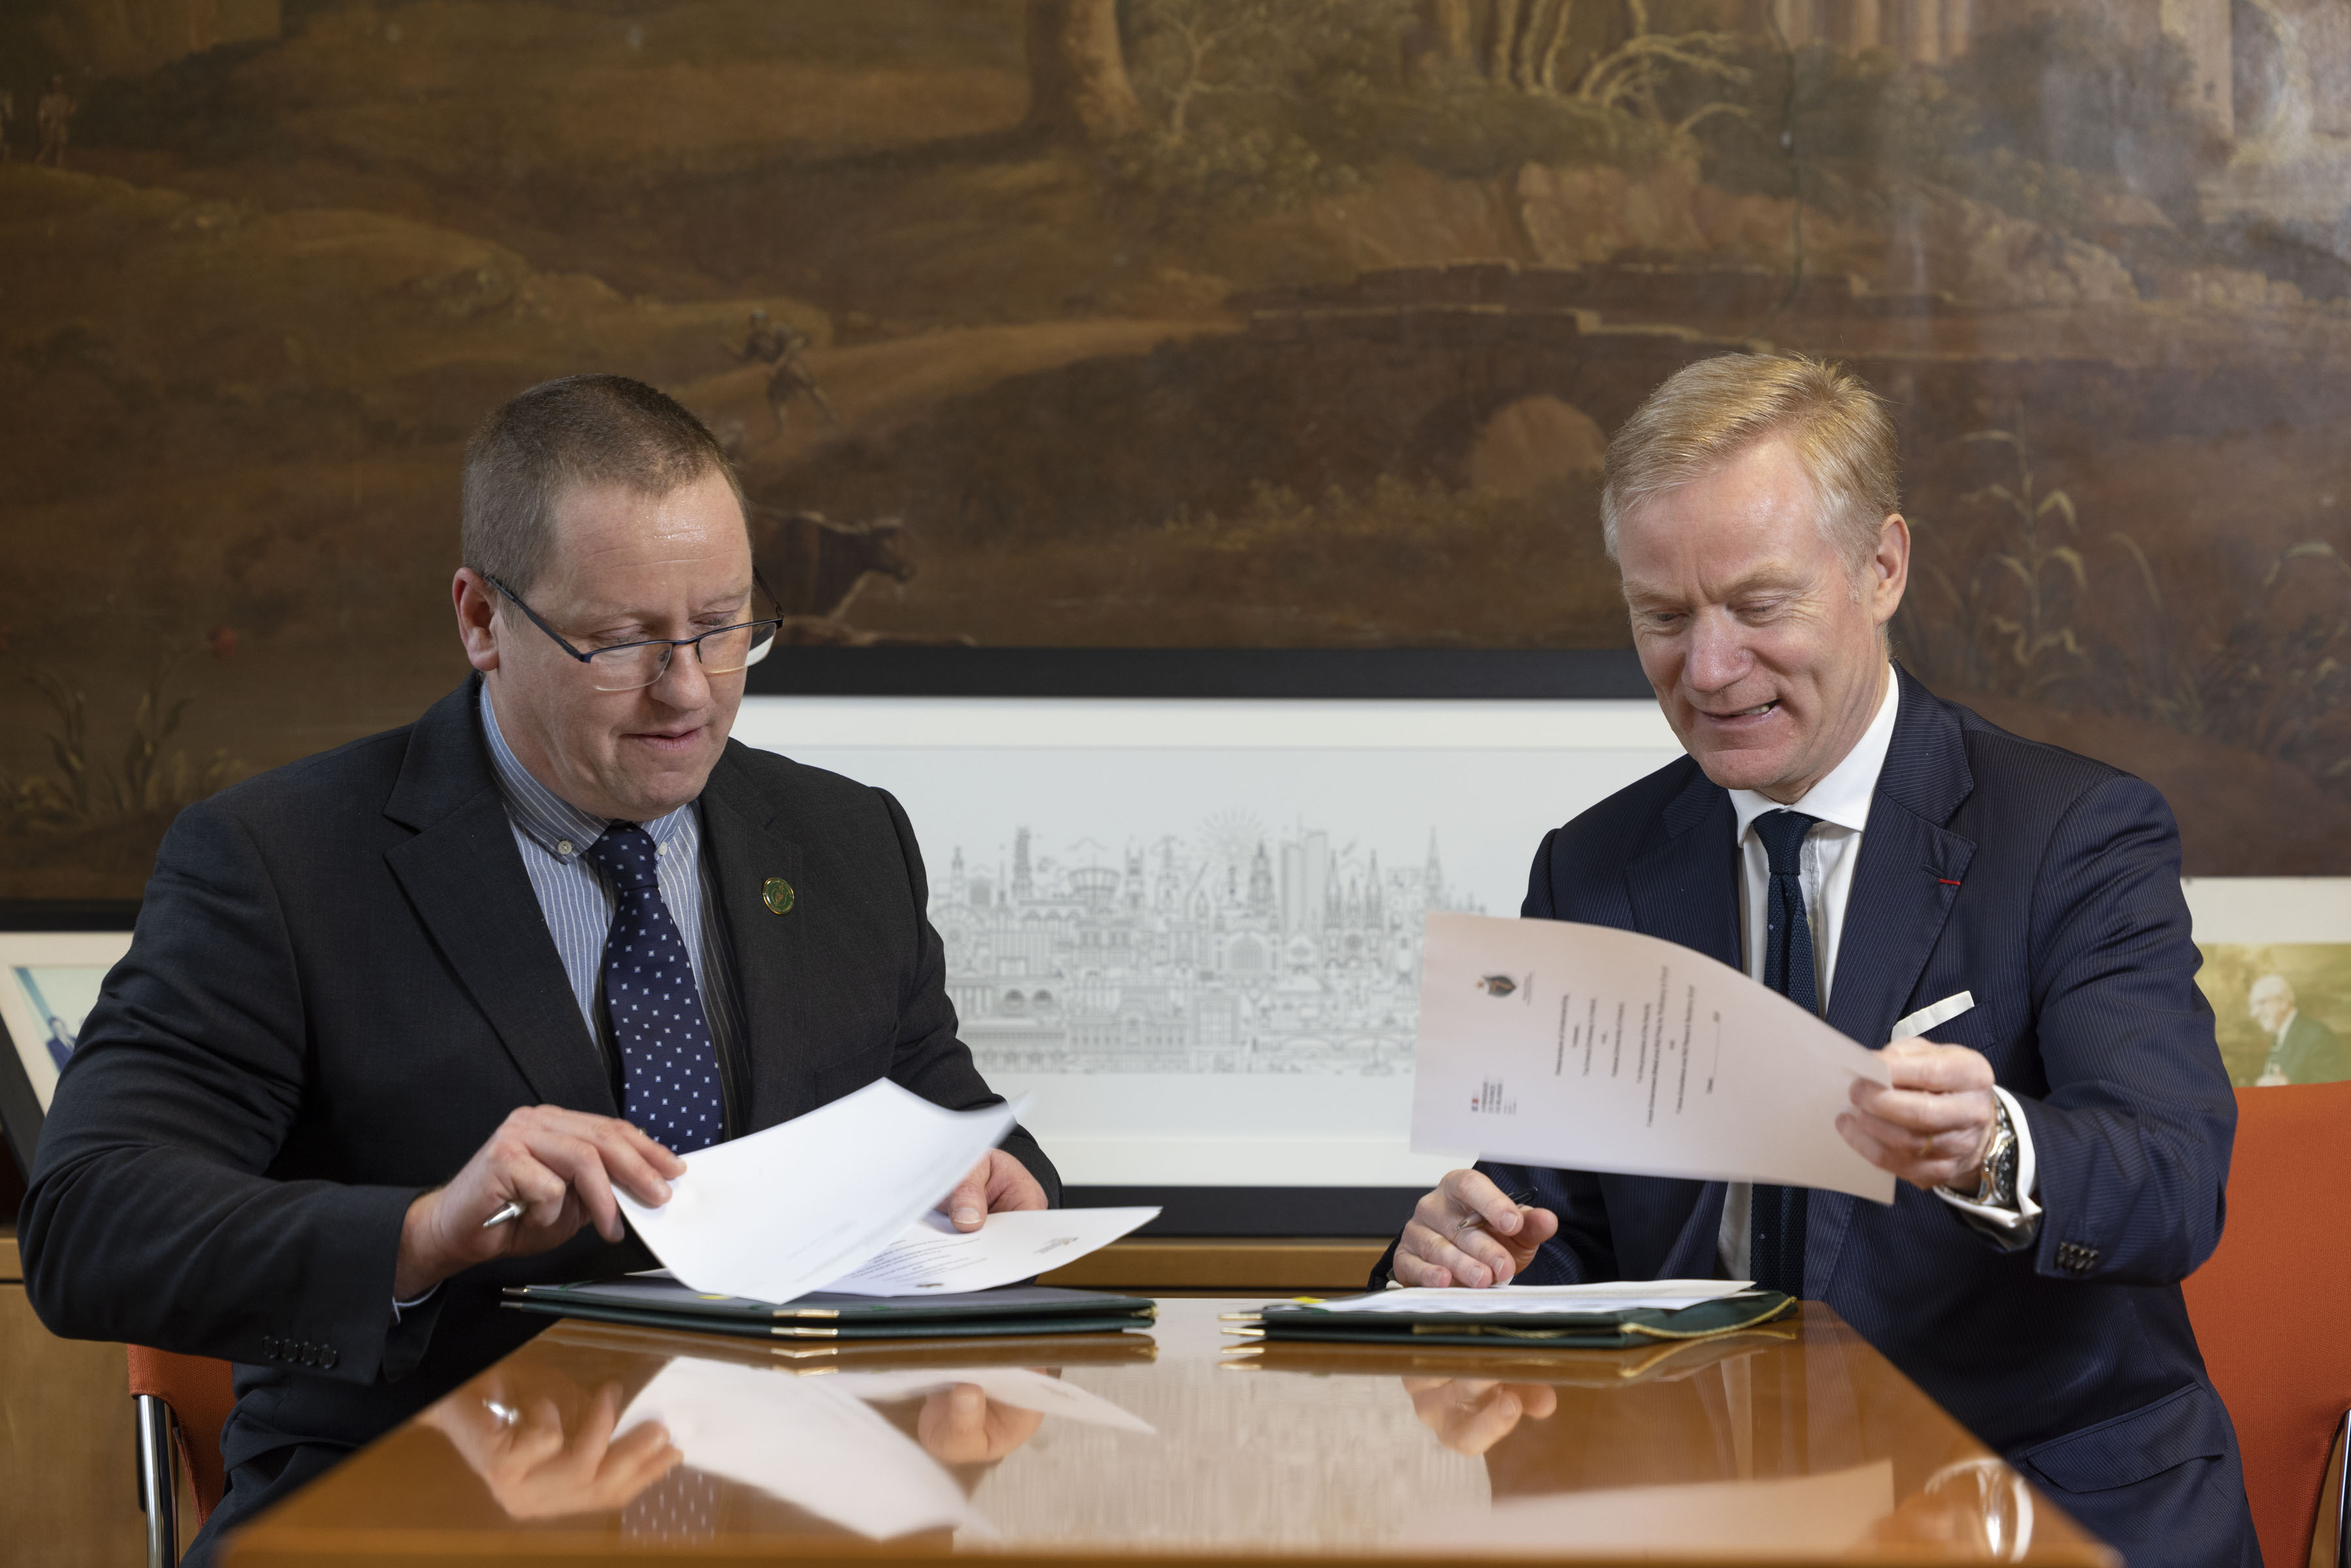 Dr Patrick O'Leary and H.E. Vincent Guérend sitting at a desk in the Registrar's Office of NUI, signing the memorandum of understanding in relation to the NUI - French Embassy collaborative grant.